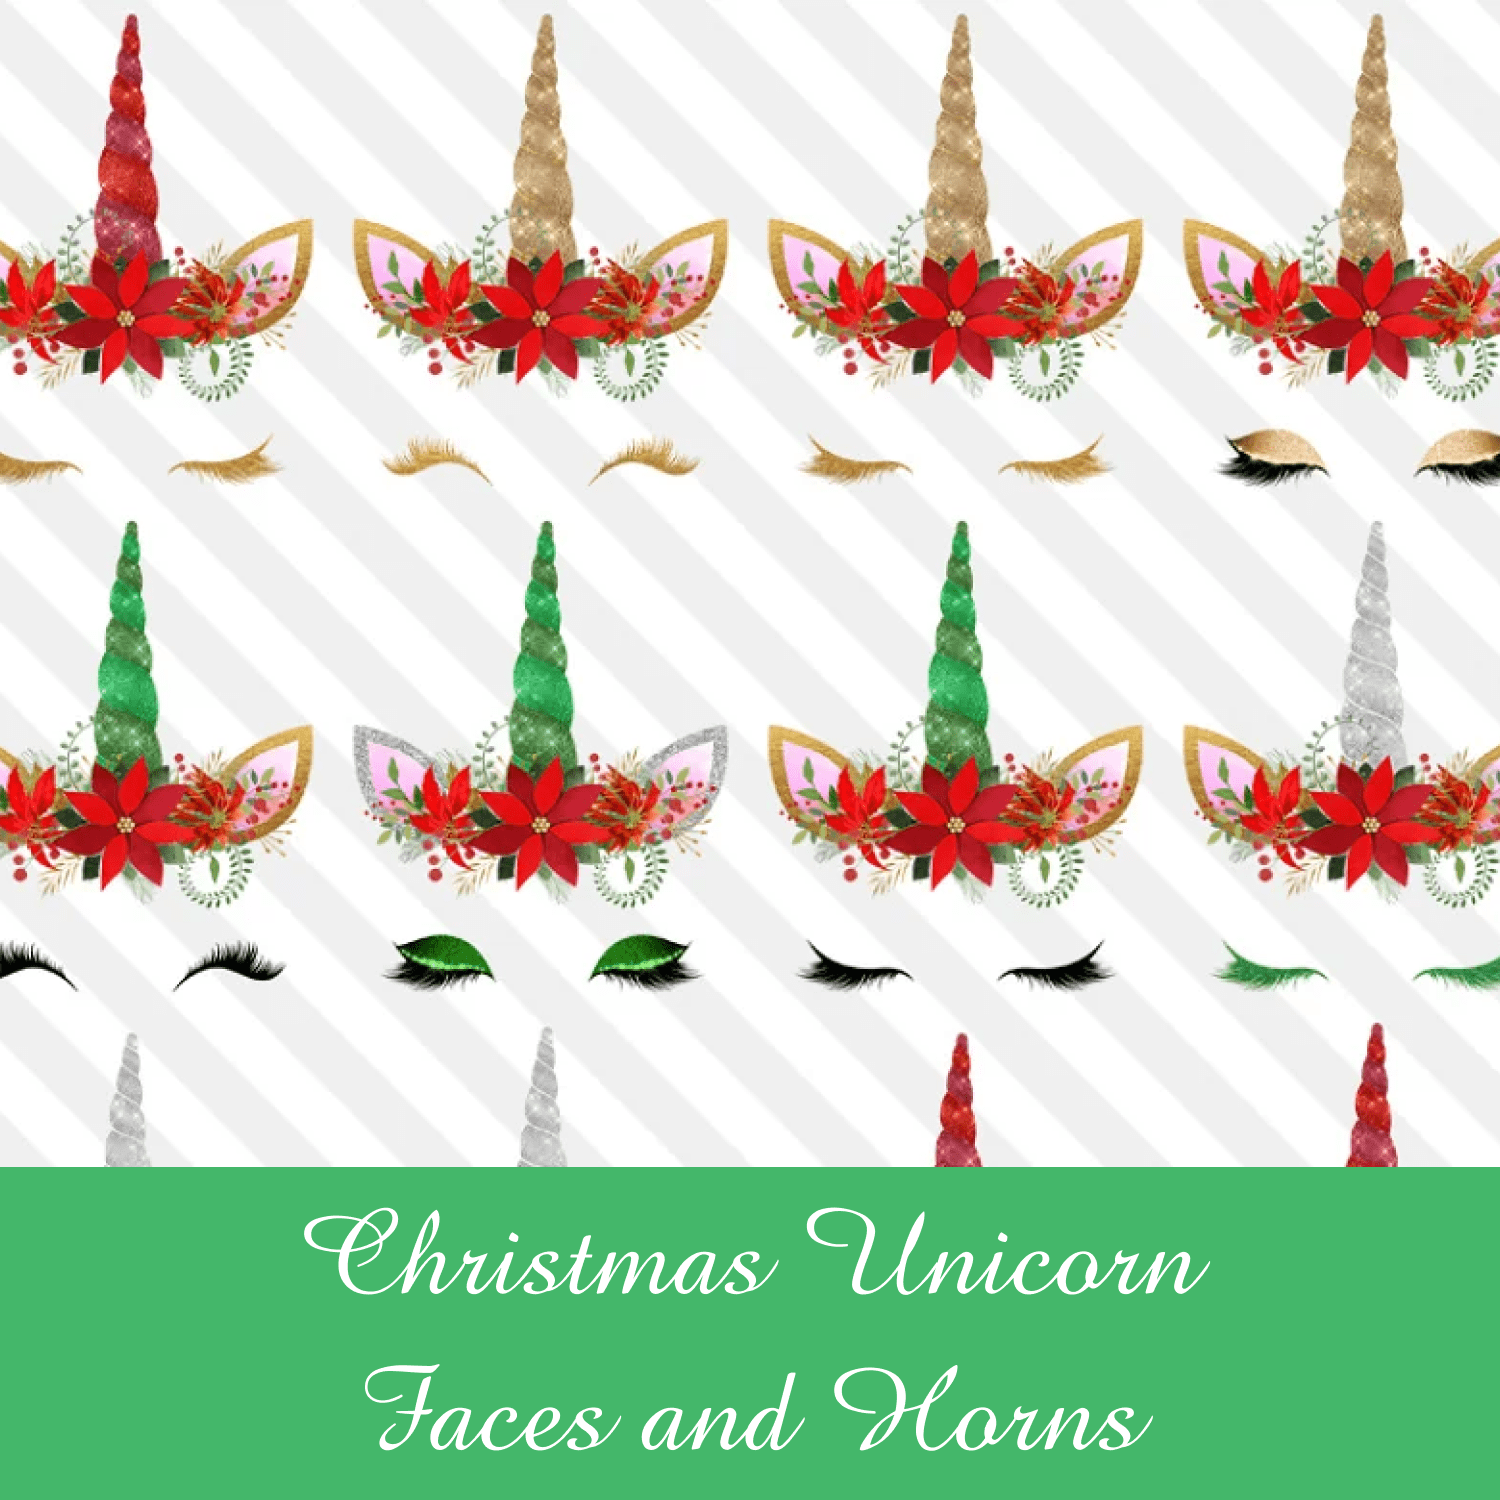 Christmas Unicorn Faces and Horns cover.